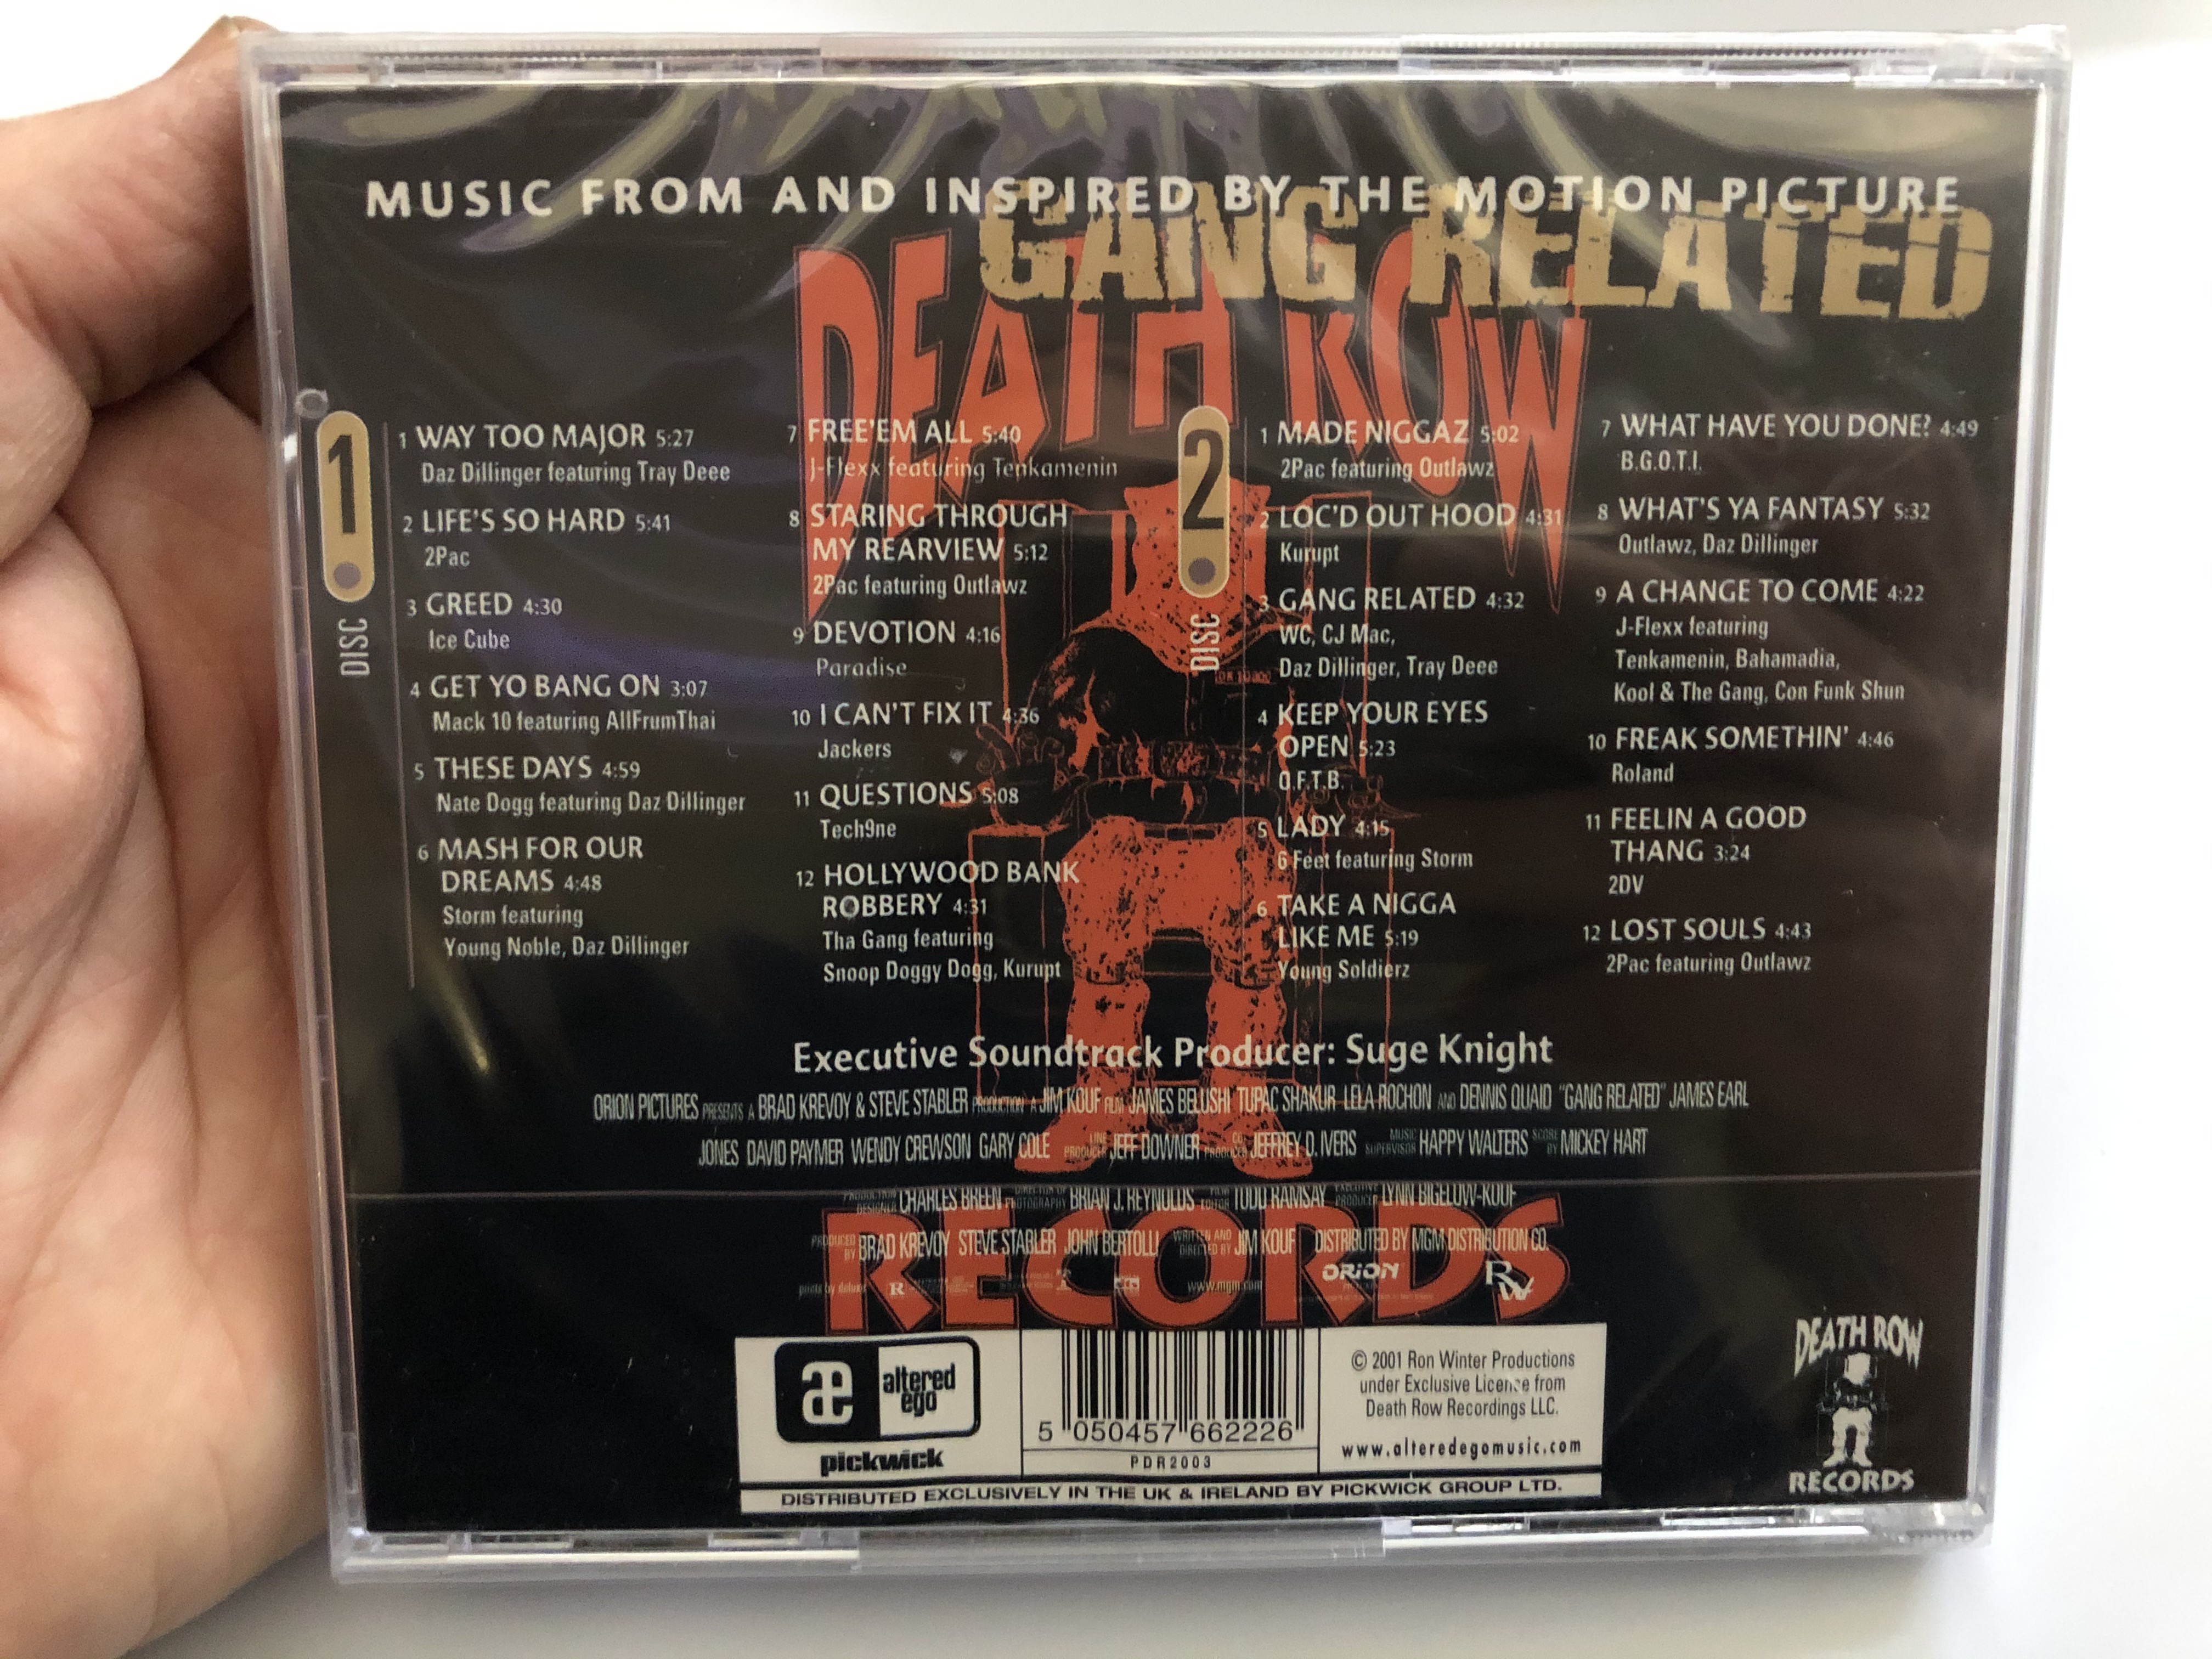 wild-wild-west-gang-related-the-soundtrack-from-death-records-digitally-remastered-death-row-records-2x-audio-cd-2001-pdr2003-2-.jpg